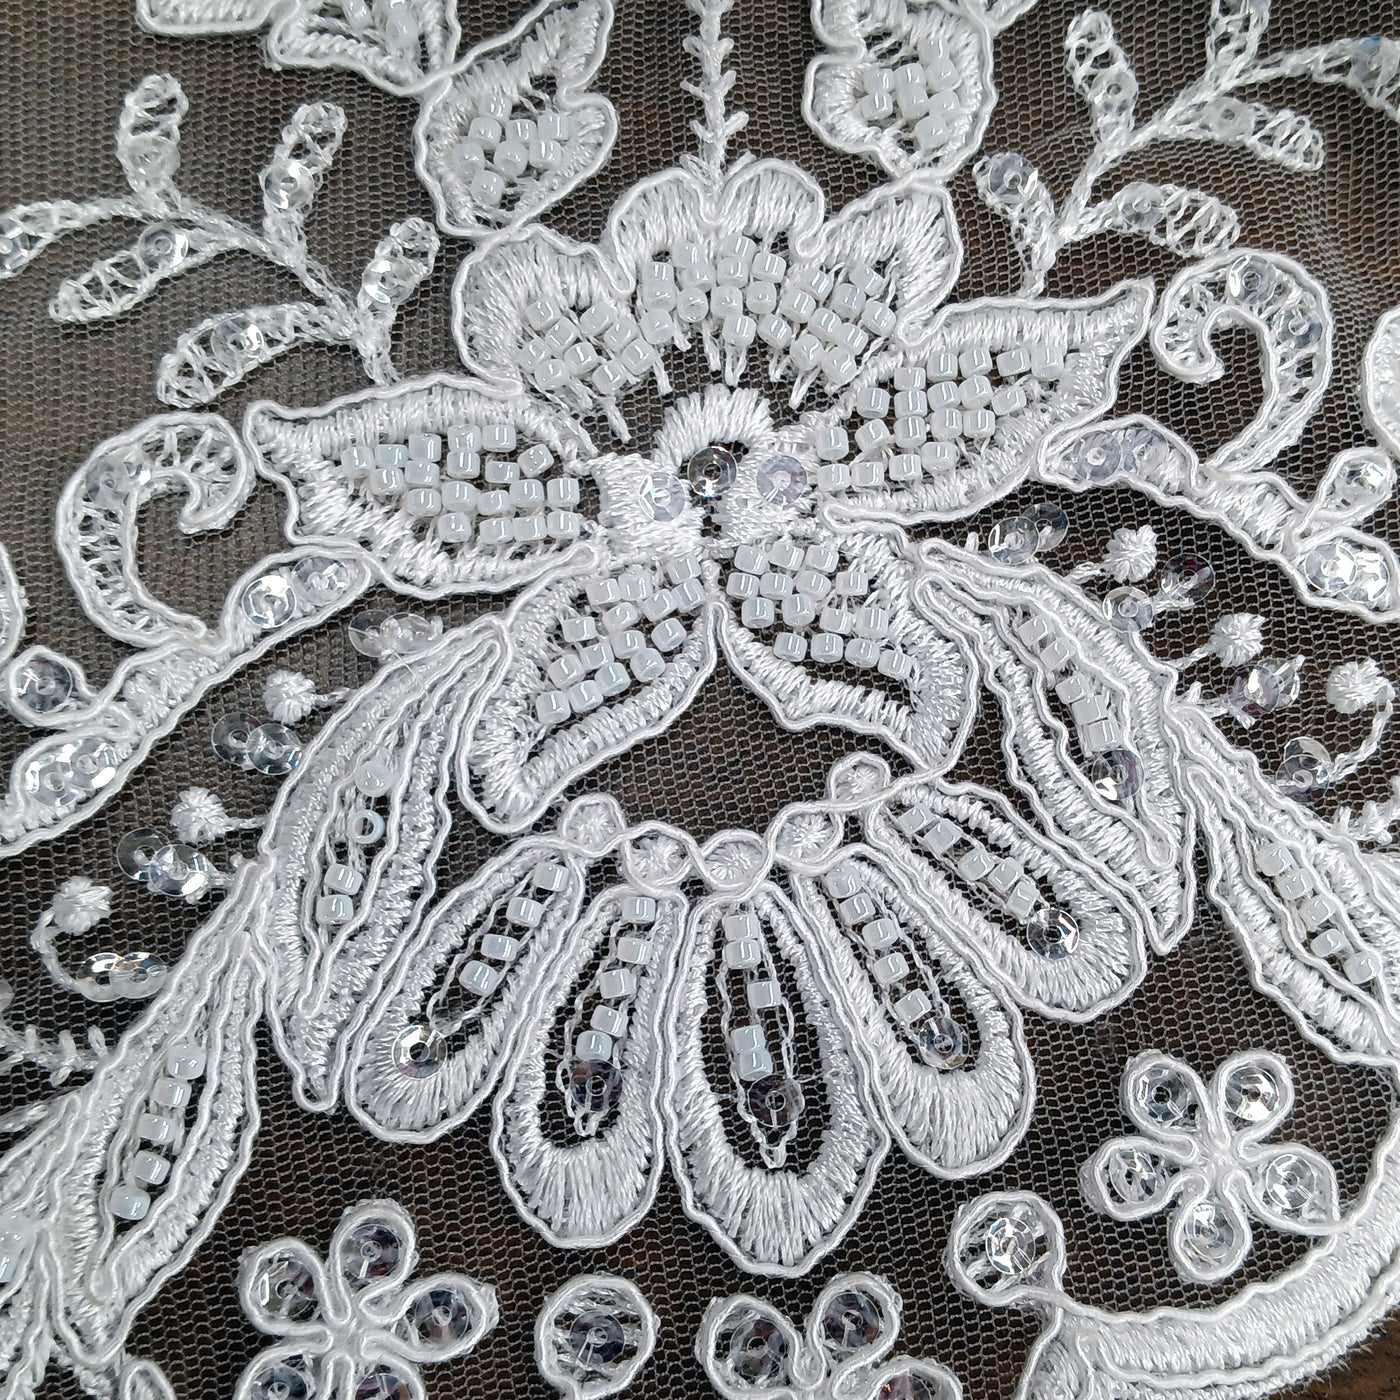 Beaded & Corded Bridal Lace Fabric Embroidered on 100% Polyester Net Mesh | Lace USA - GD-55518 White